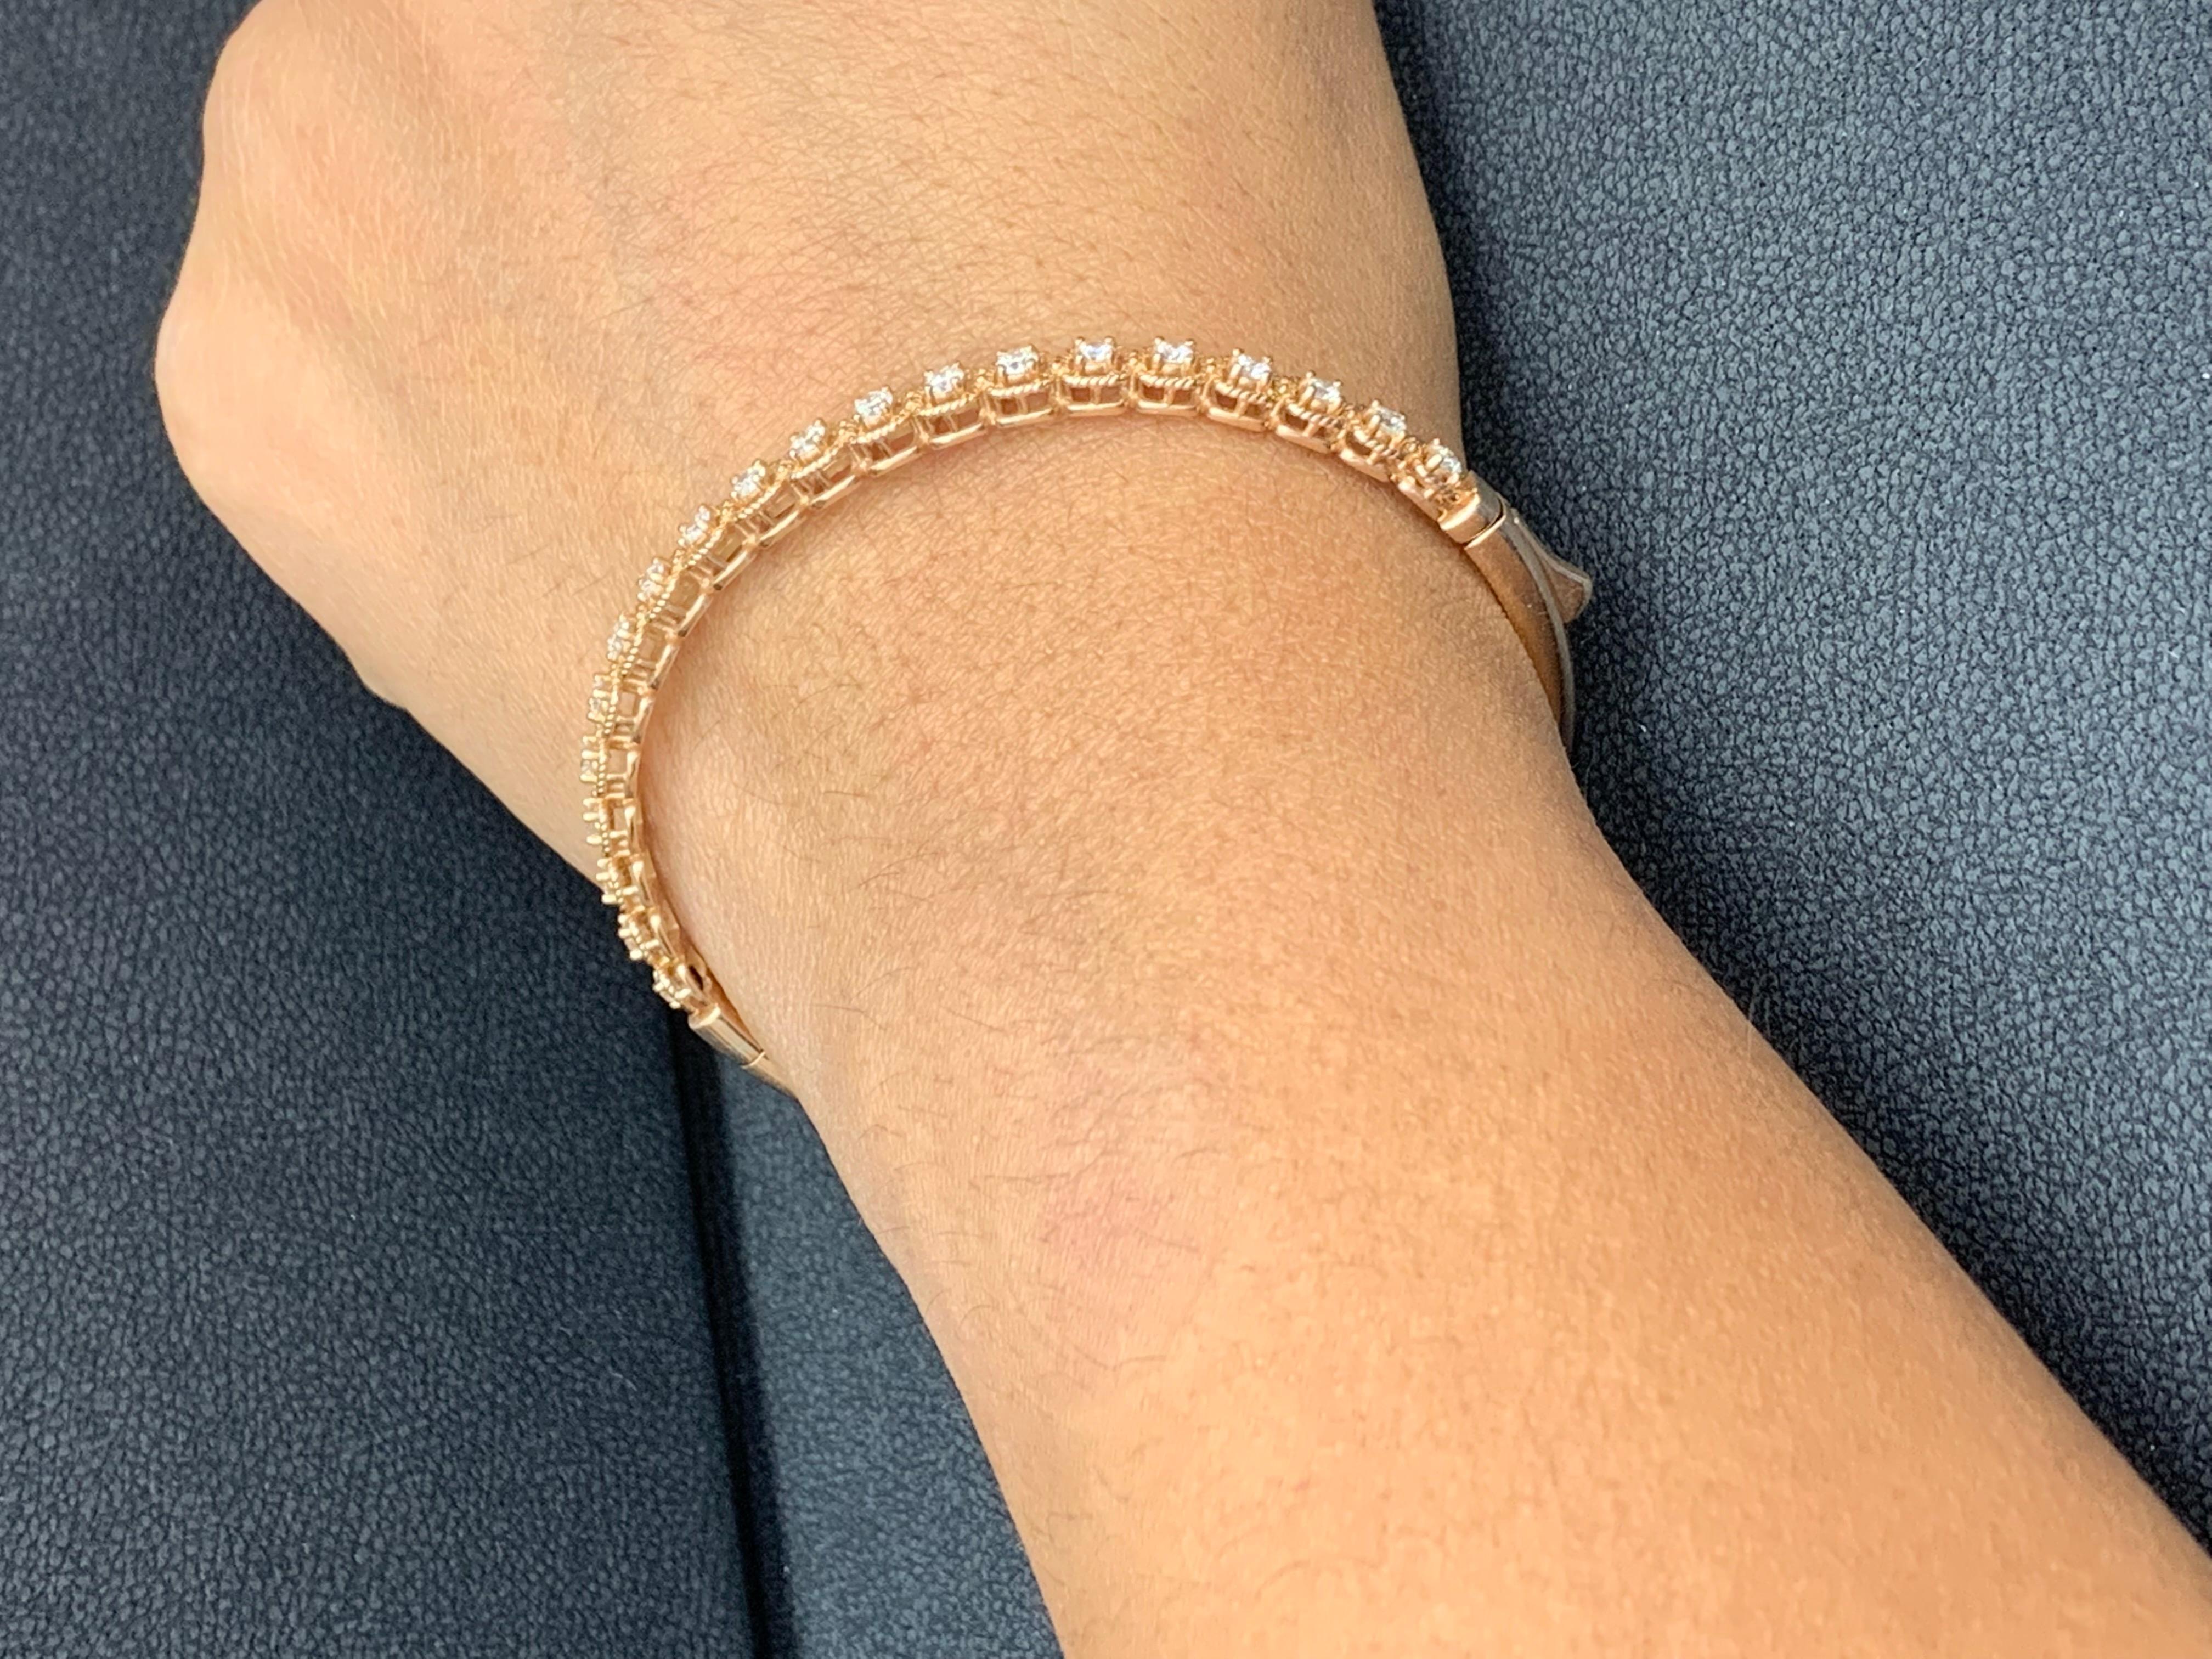 A stunning bangle bracelet set with 20 sparkling round diamonds weighing 1.21 carats total. Diamonds are set in rope design polished 14k rose gold. Double lock mechanism for maximum security. A simple yet dazzling piece.